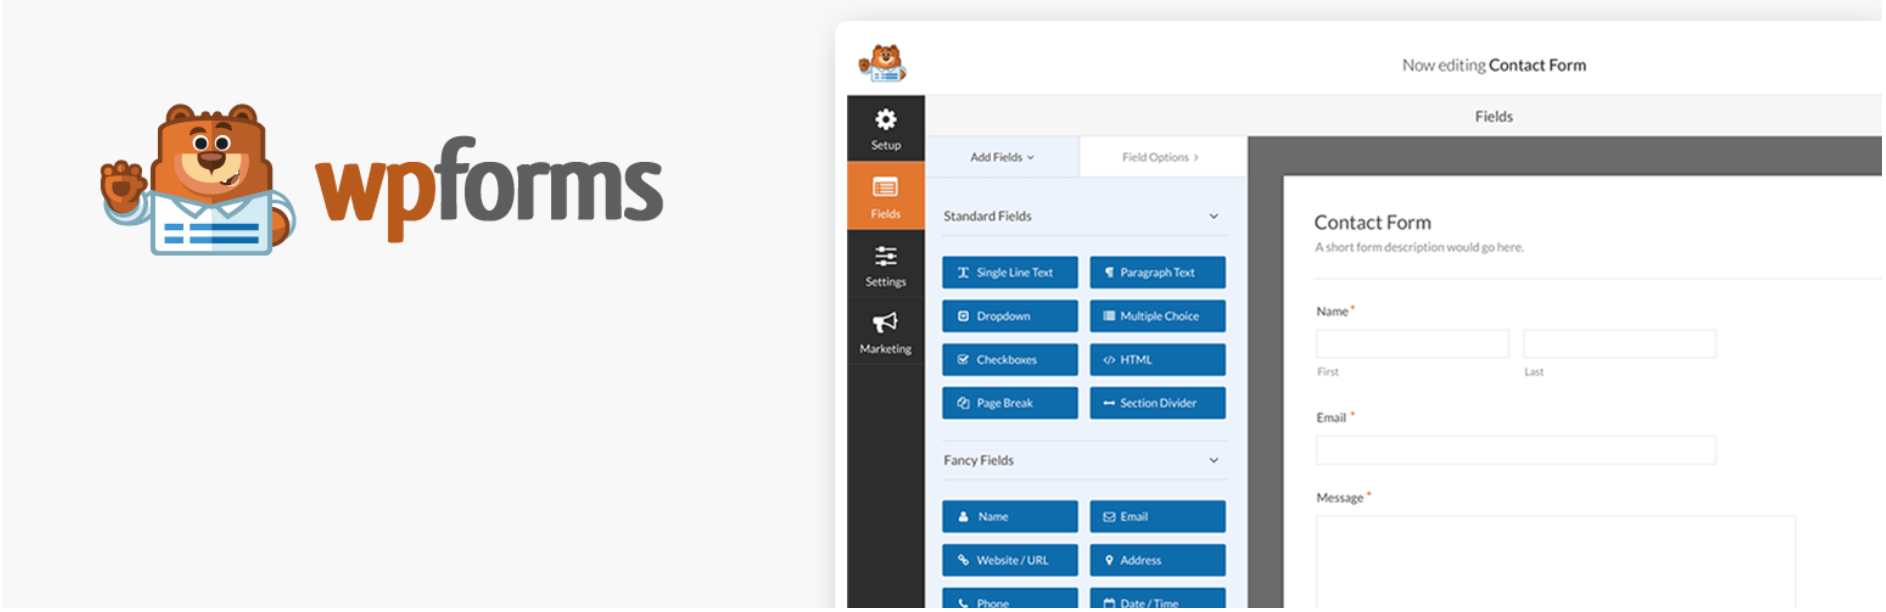 Premium WordPress login plugins like WP Forms help you customize your login pages.